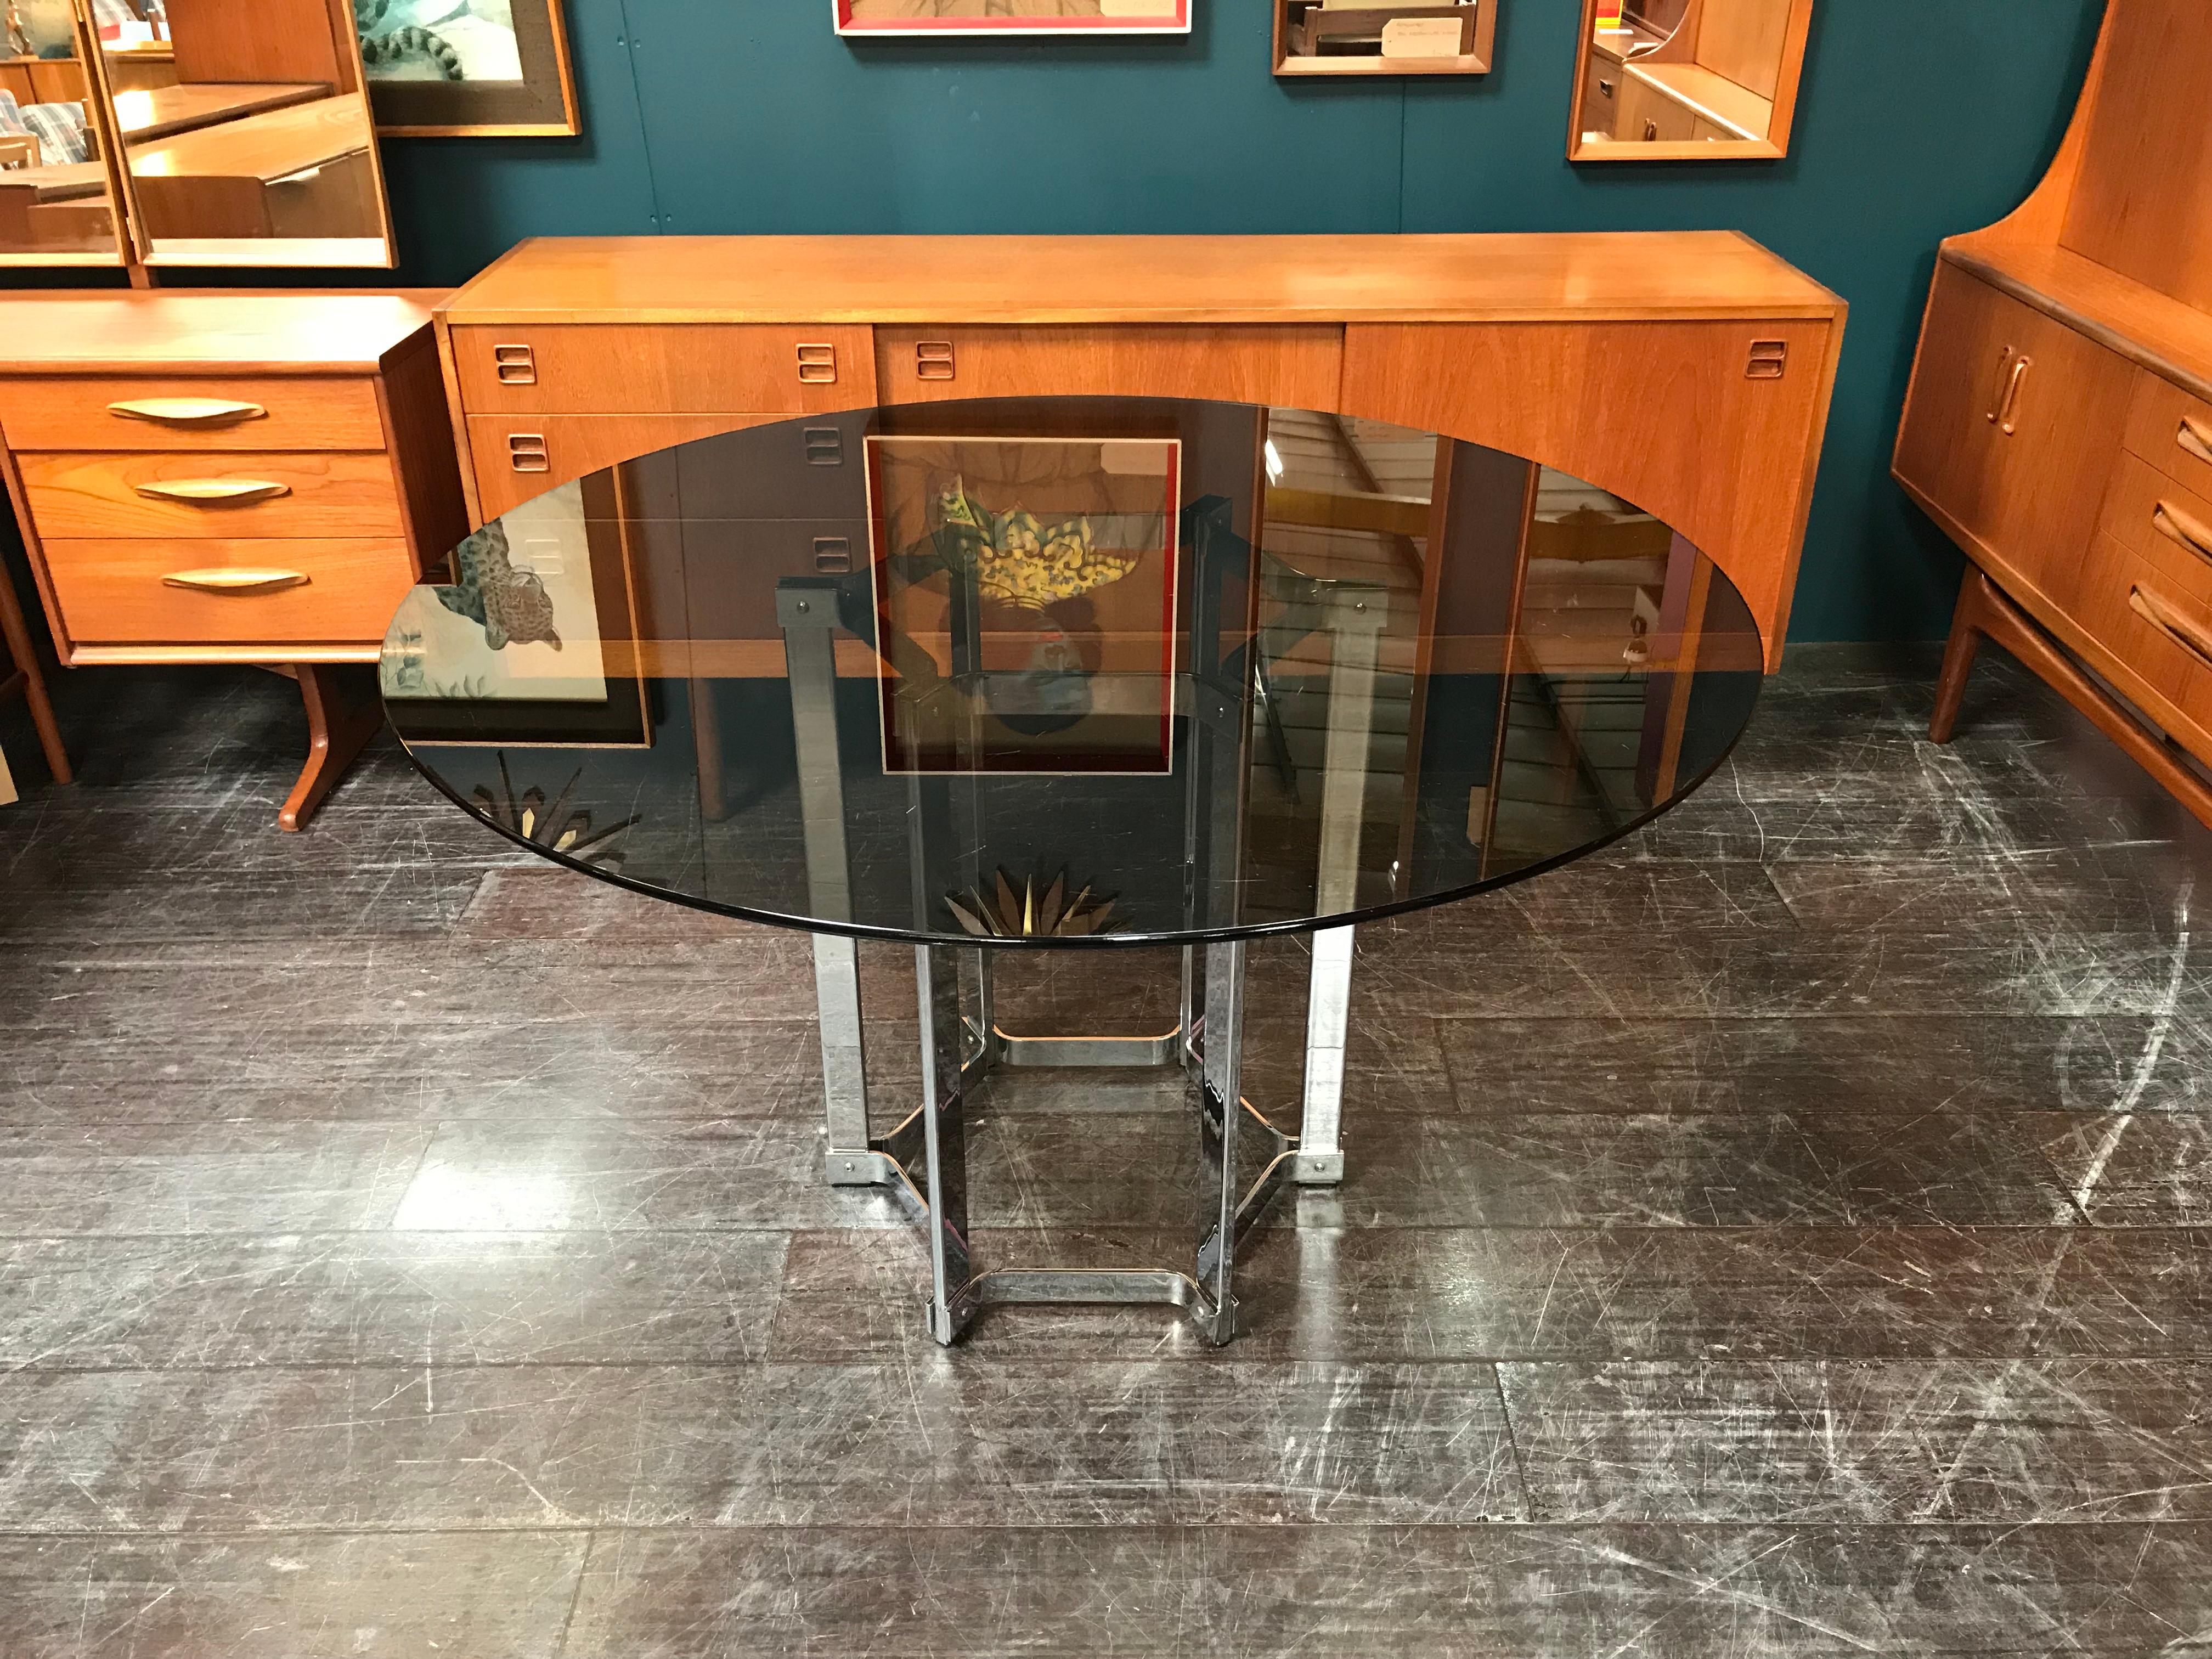 Smoked Glass Mid Century Chrome & Glass Table by Richard Young for Merrow with 4 Chairs For Sale